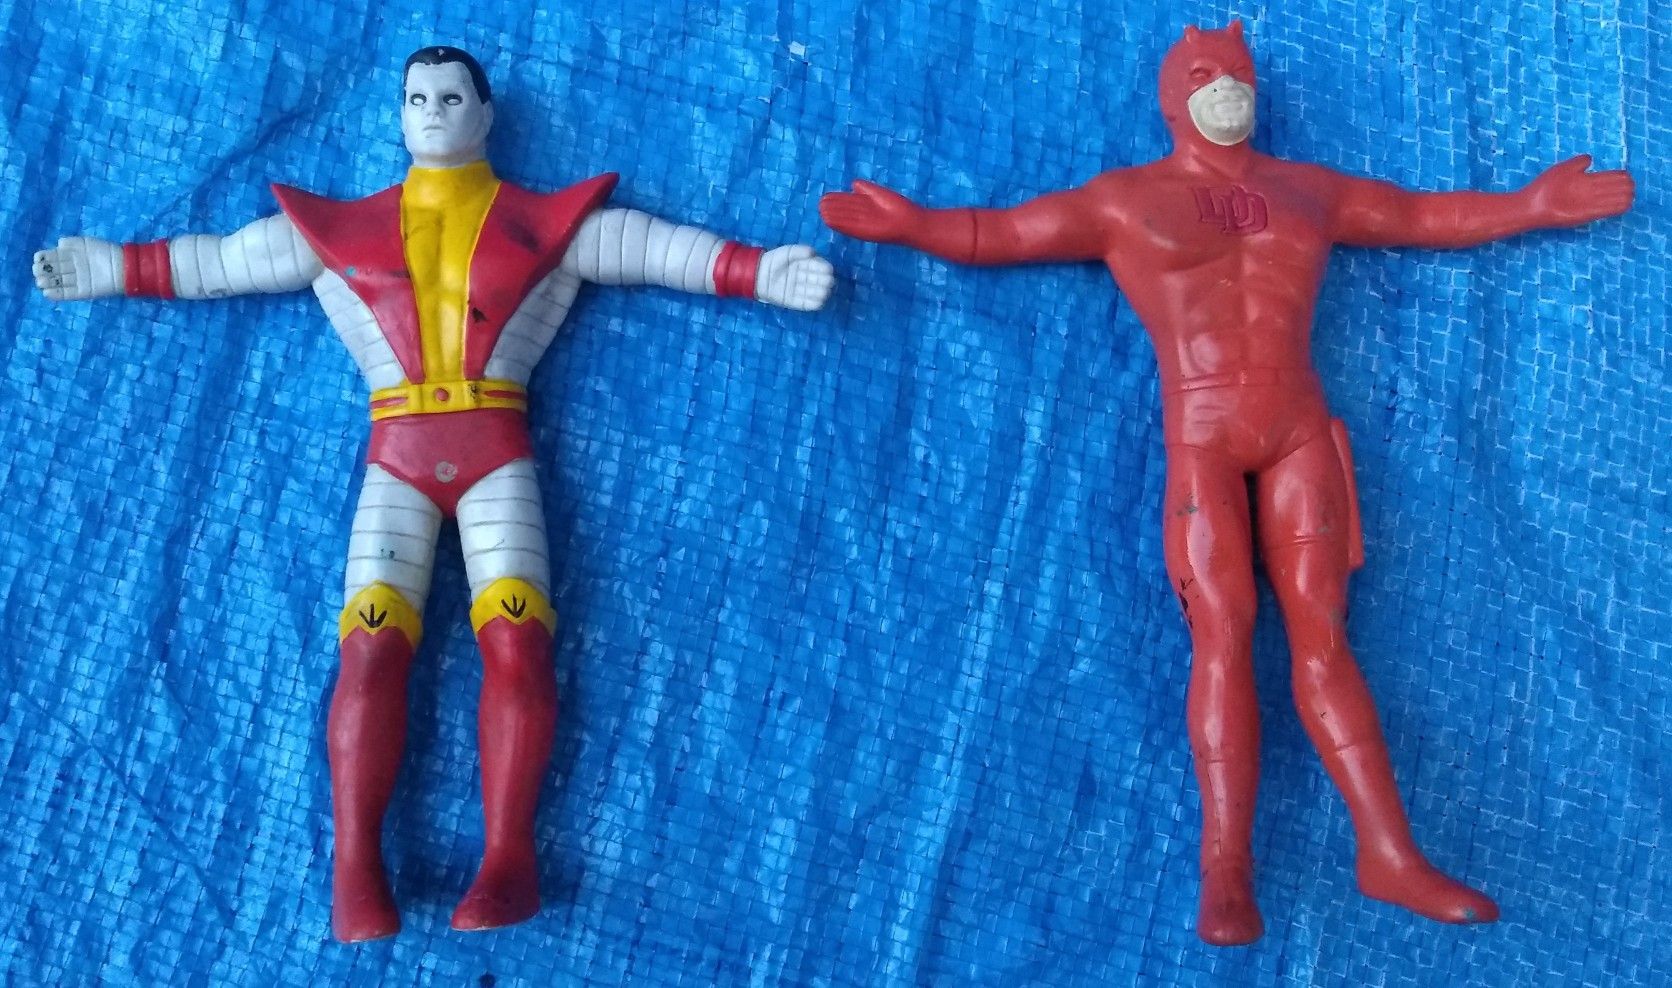 1991 Justoys Marvel Bendable Action Figure Lot Colossus & Daredevil Vintage Collectible